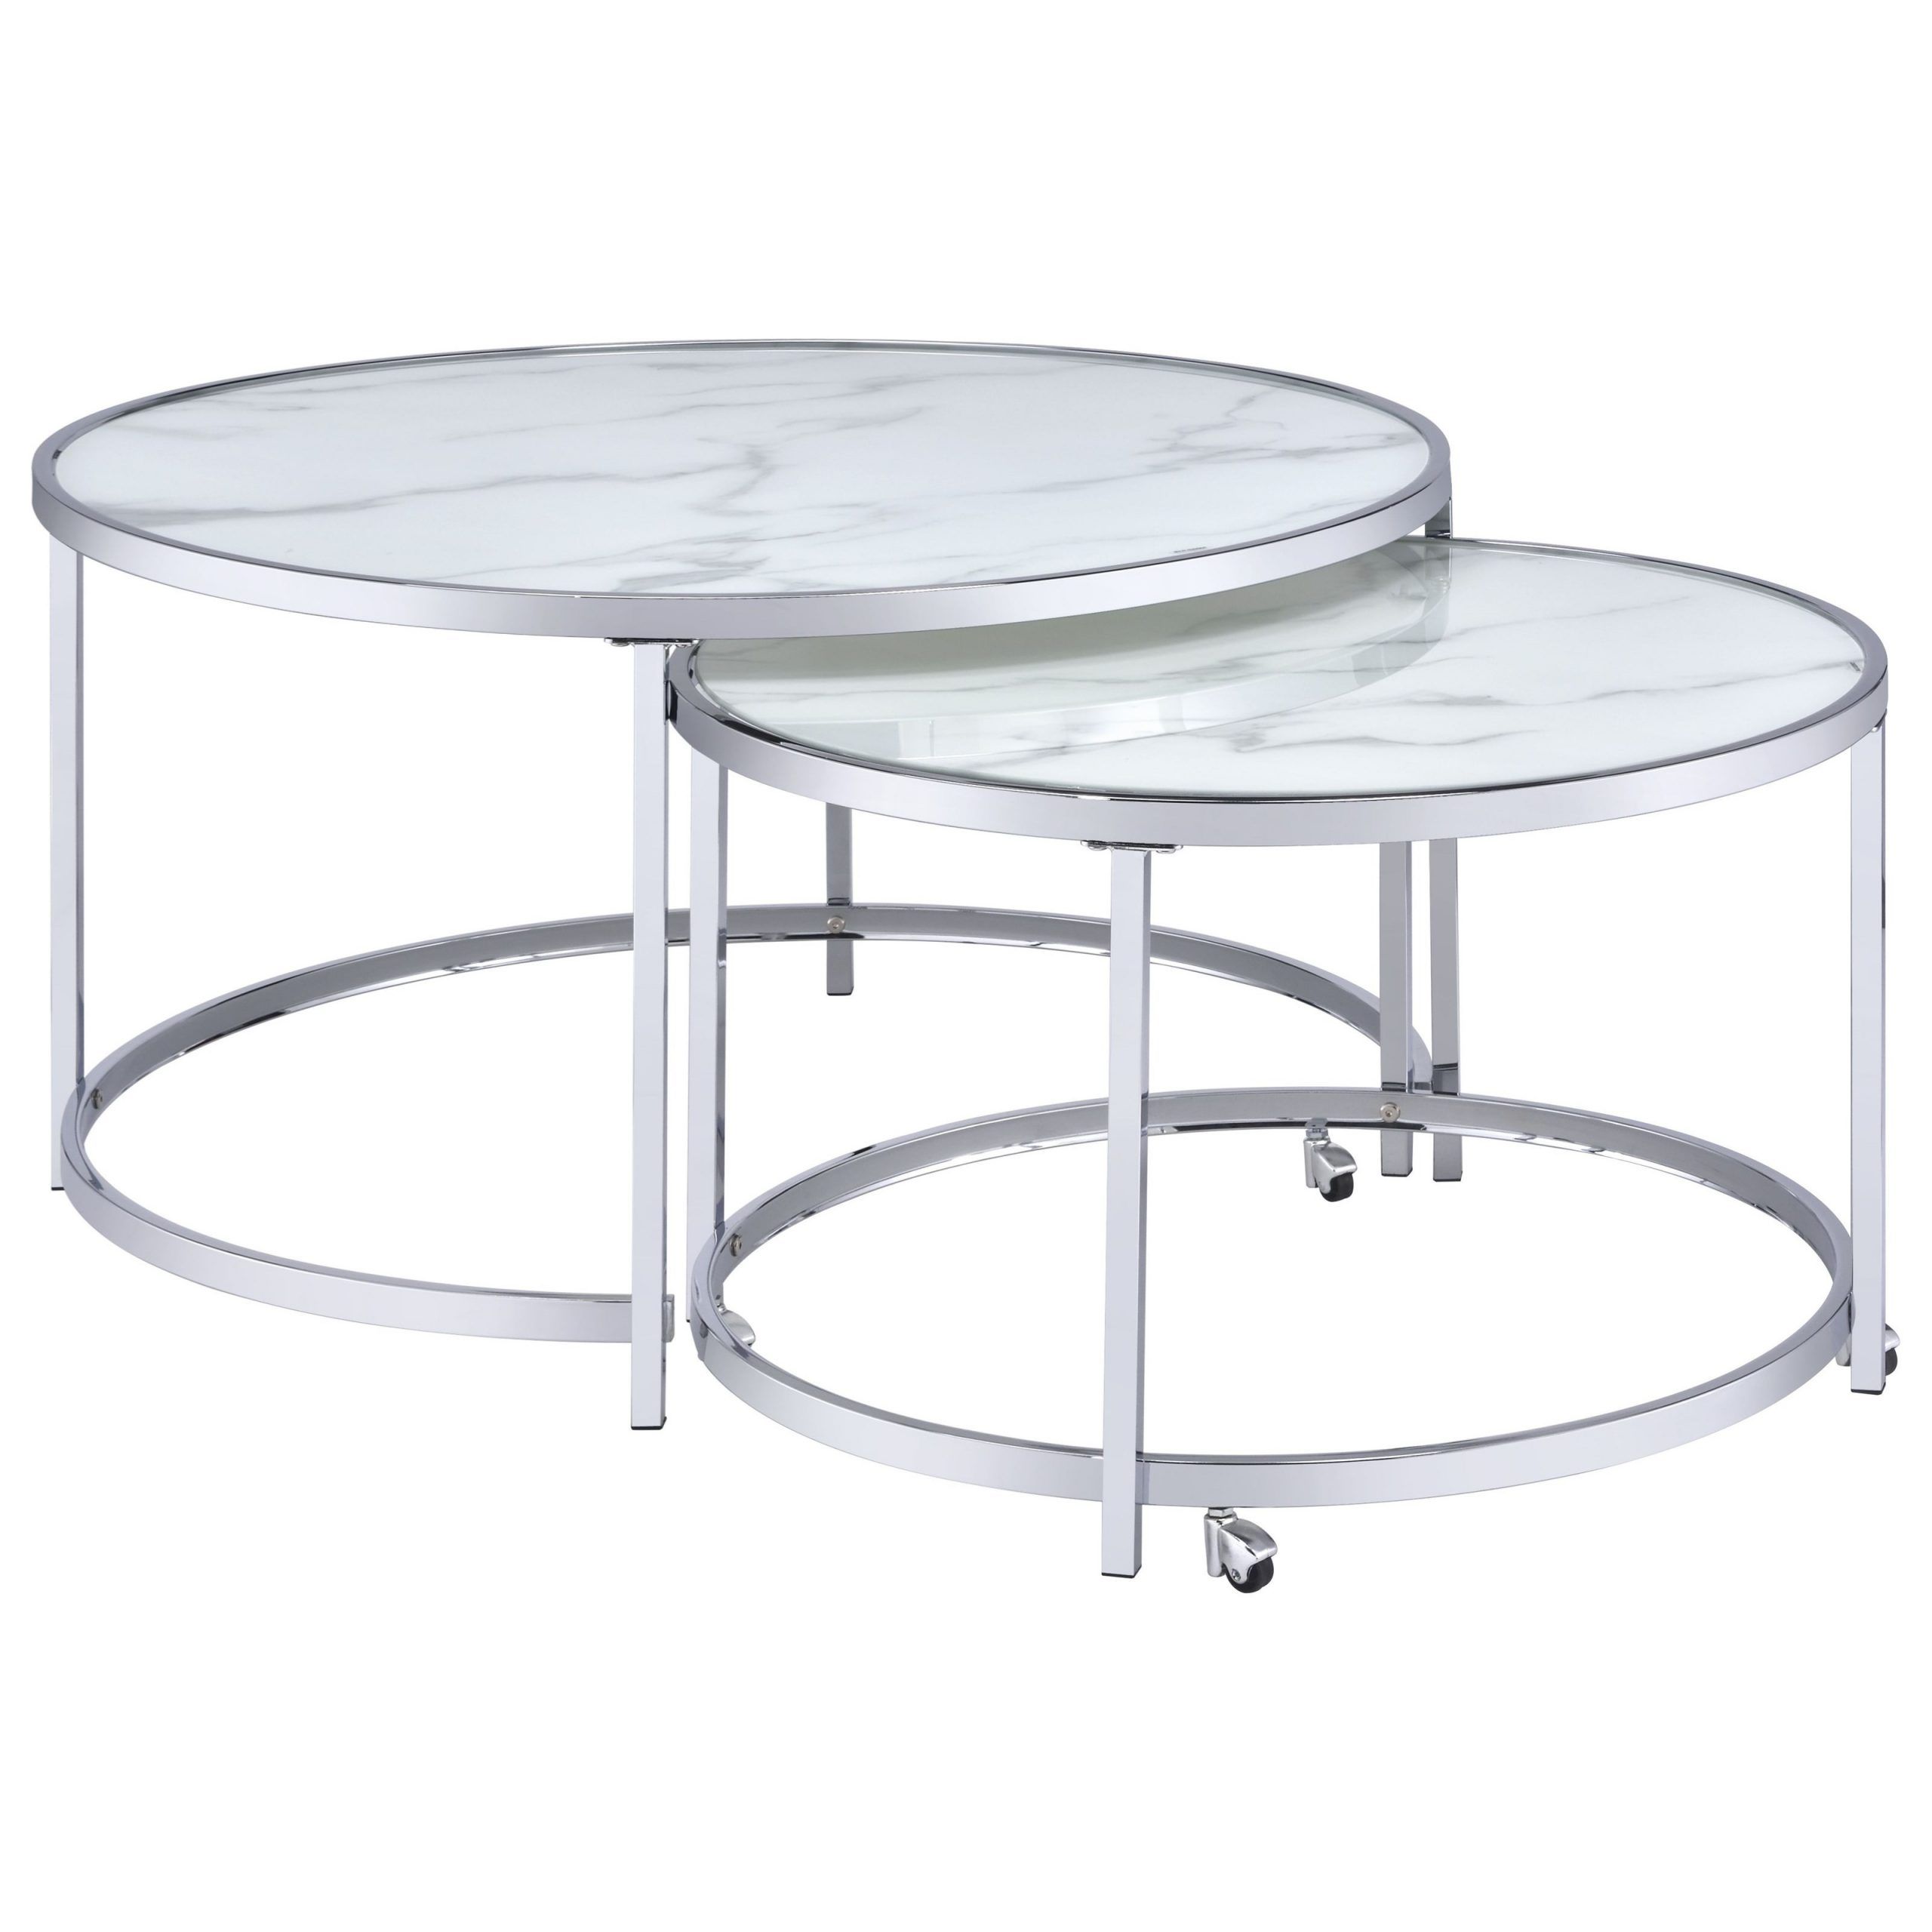 Steve Silver Rayne Contemporary Nesting Cocktail Tables With Faux In Well Known Metallic Silver Cocktail Tables (View 10 of 10)